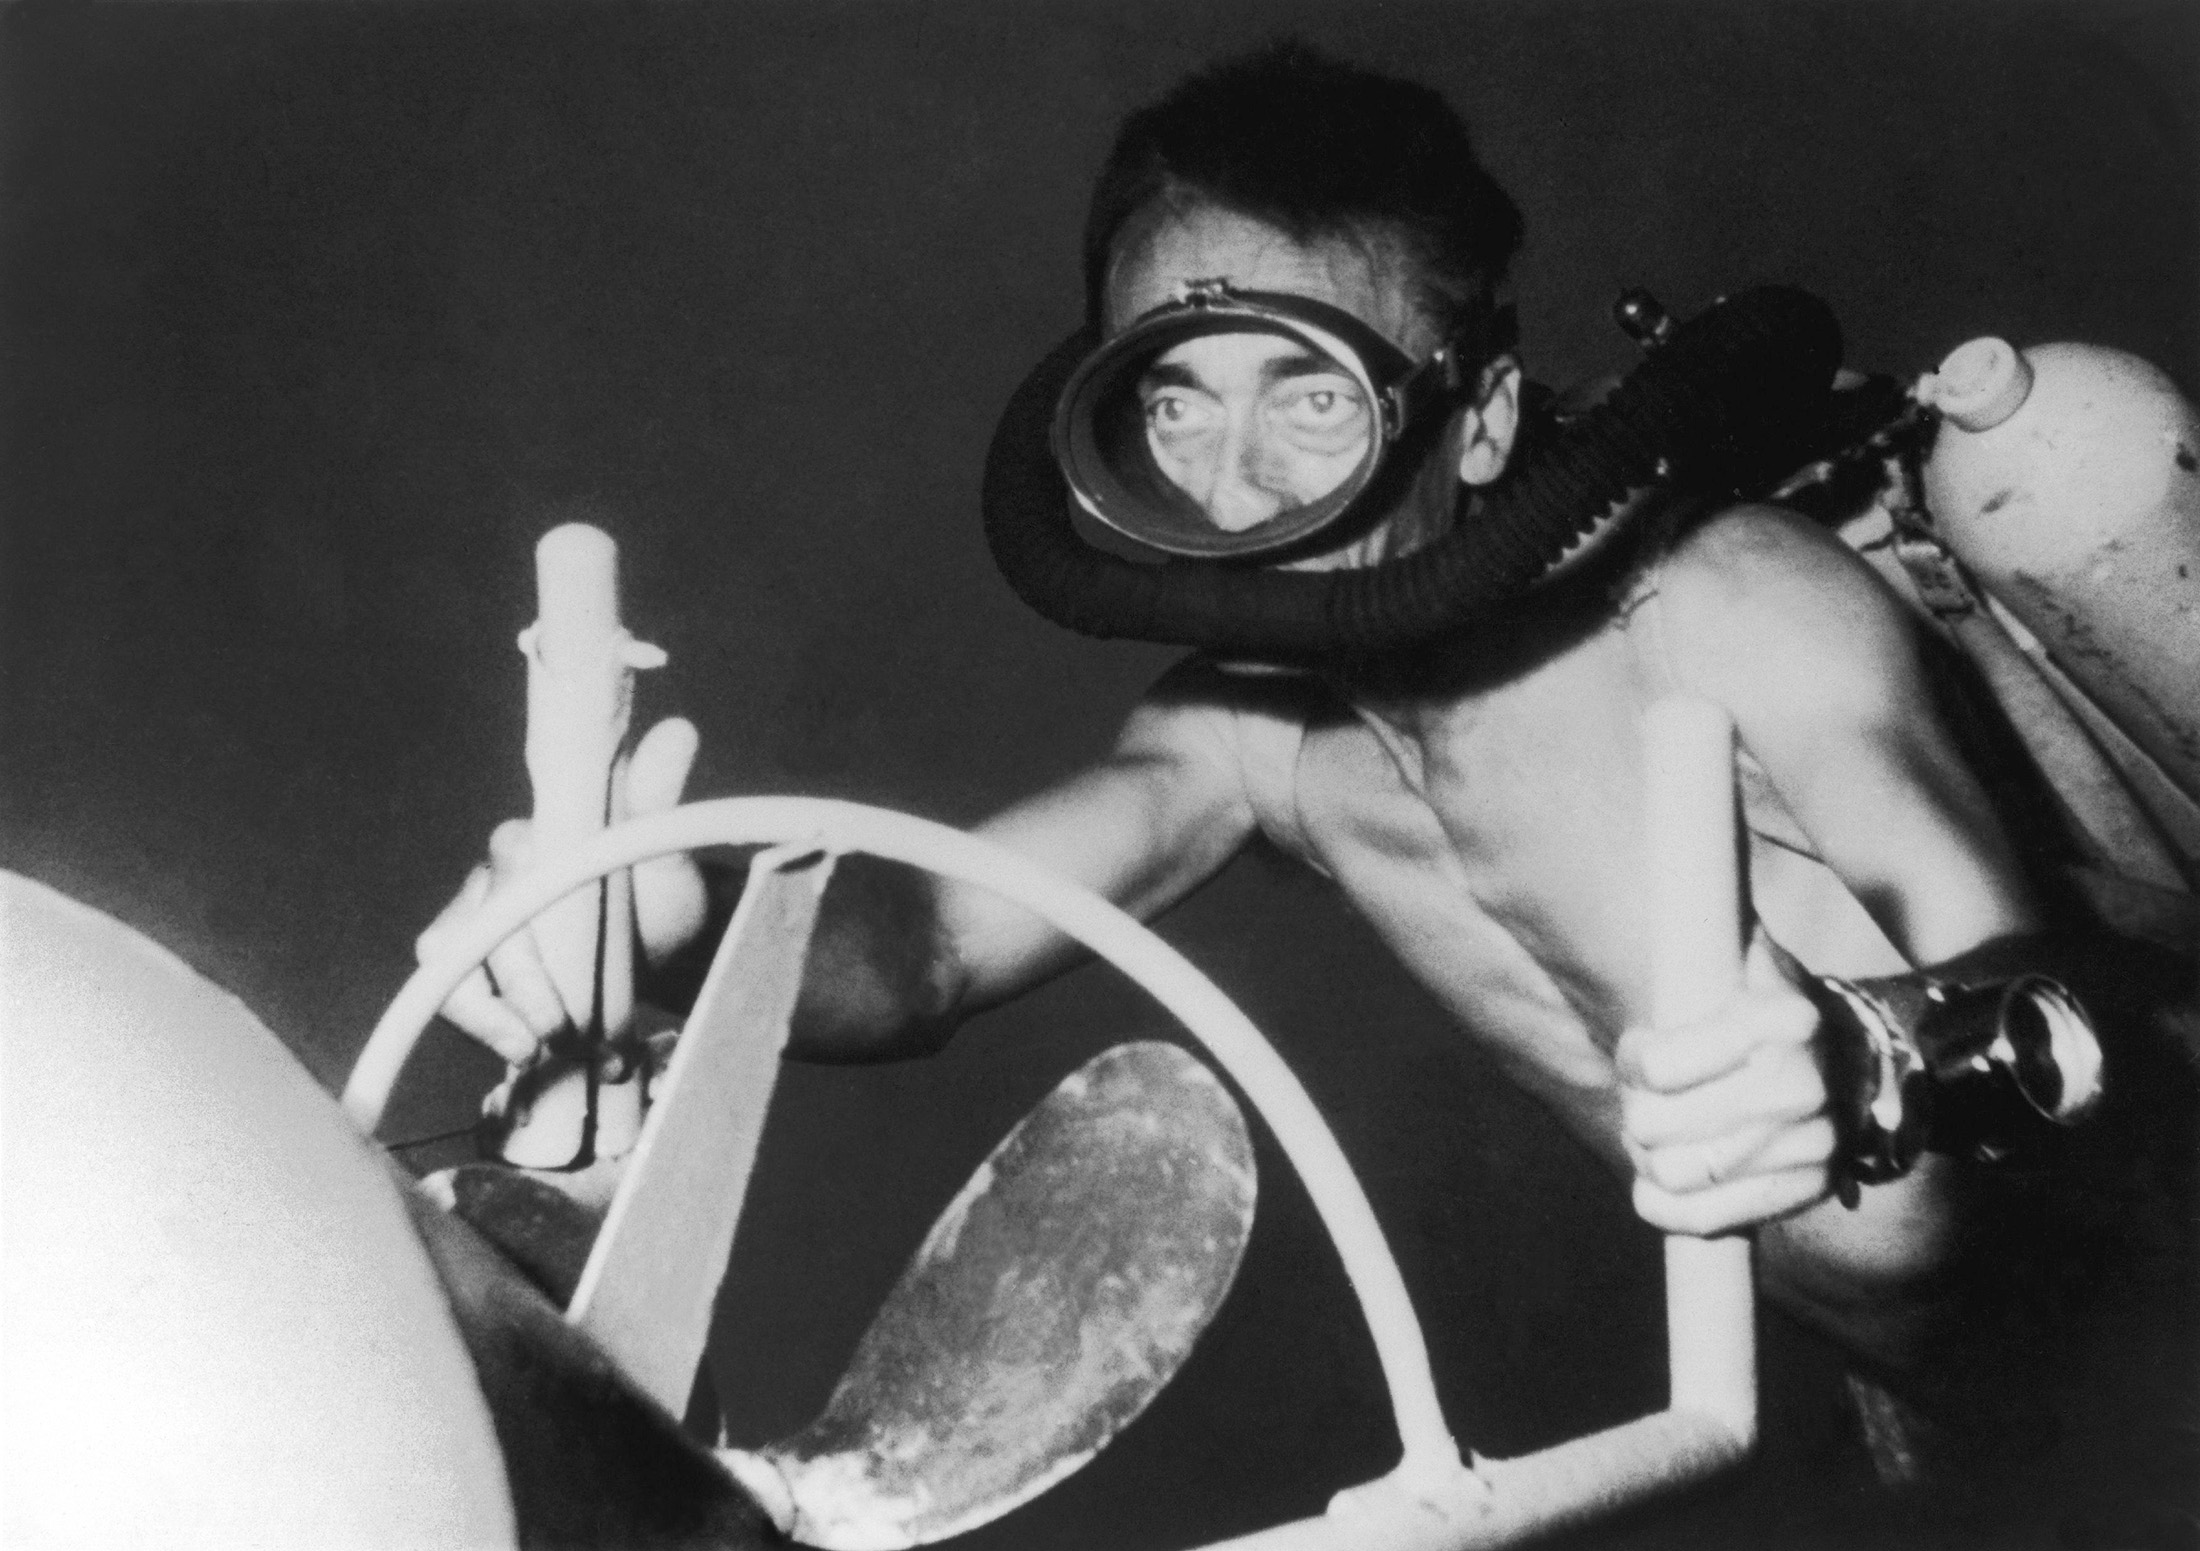 Black and white photo of man in scuba gear underwater